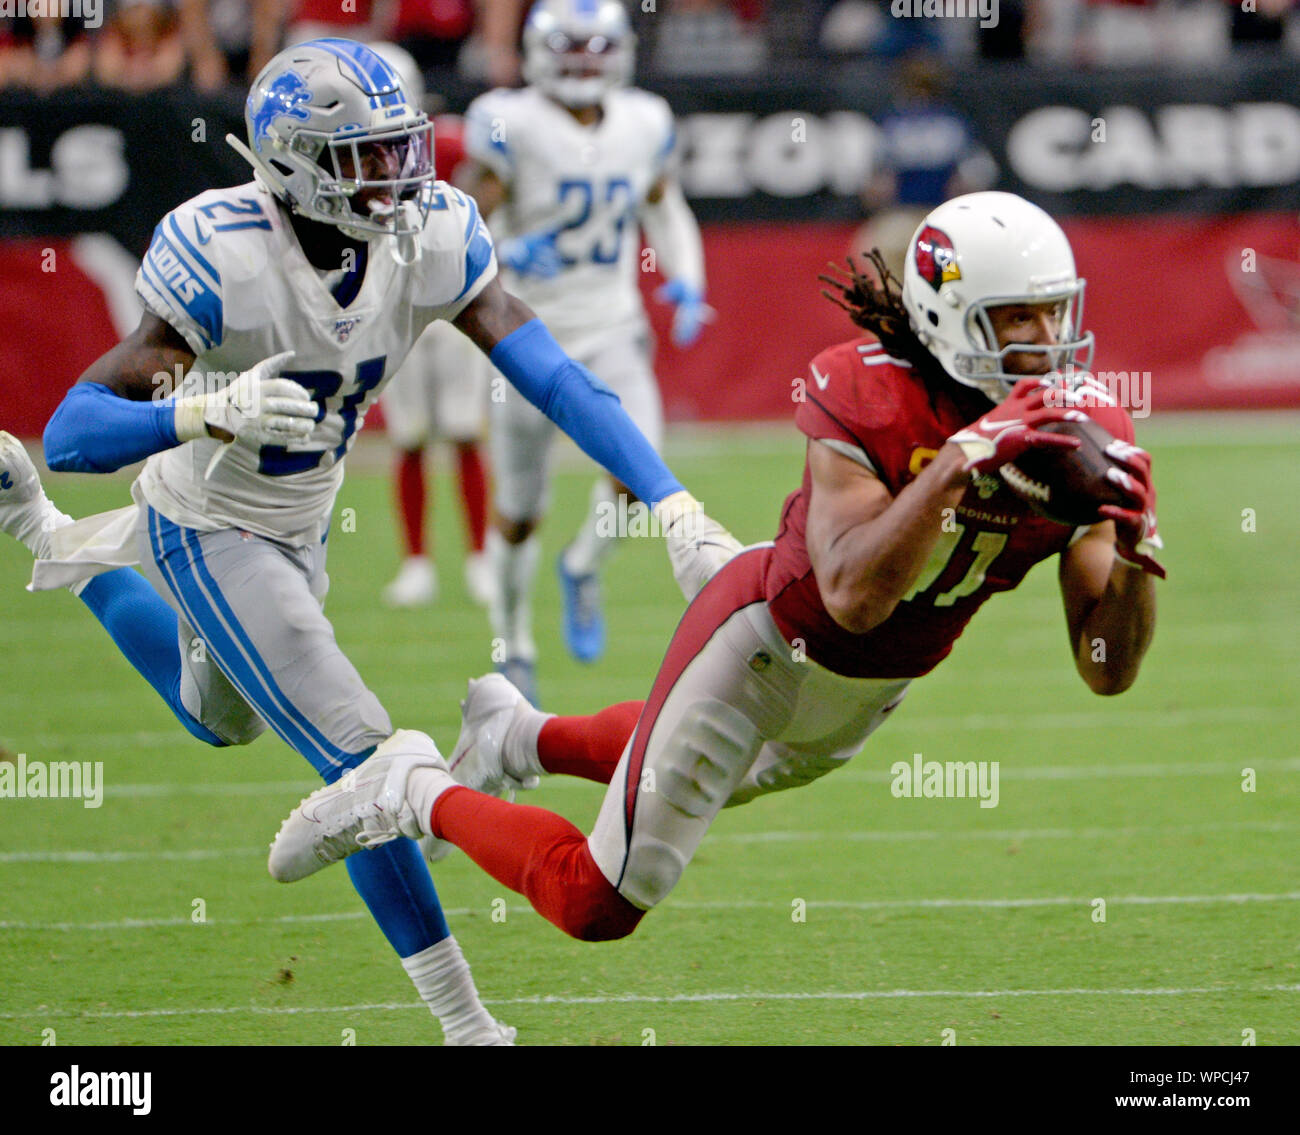 Glendale, Arizona, USA. 08th Sep, 2019. Arizona Cardinals' receiver Larry Fitzgerald (R) makes a diving catch to for a first down as Detroit Lions' Tracy Walker in the fourth quarter at State Farm Stadium in Glendale, Arizona on Sunday, September 8, 2019.  The Lions and Cardinals played to a 27-27 tie. Photo by Art Foxall/UPI Credit: UPI/Alamy Live News Stock Photo